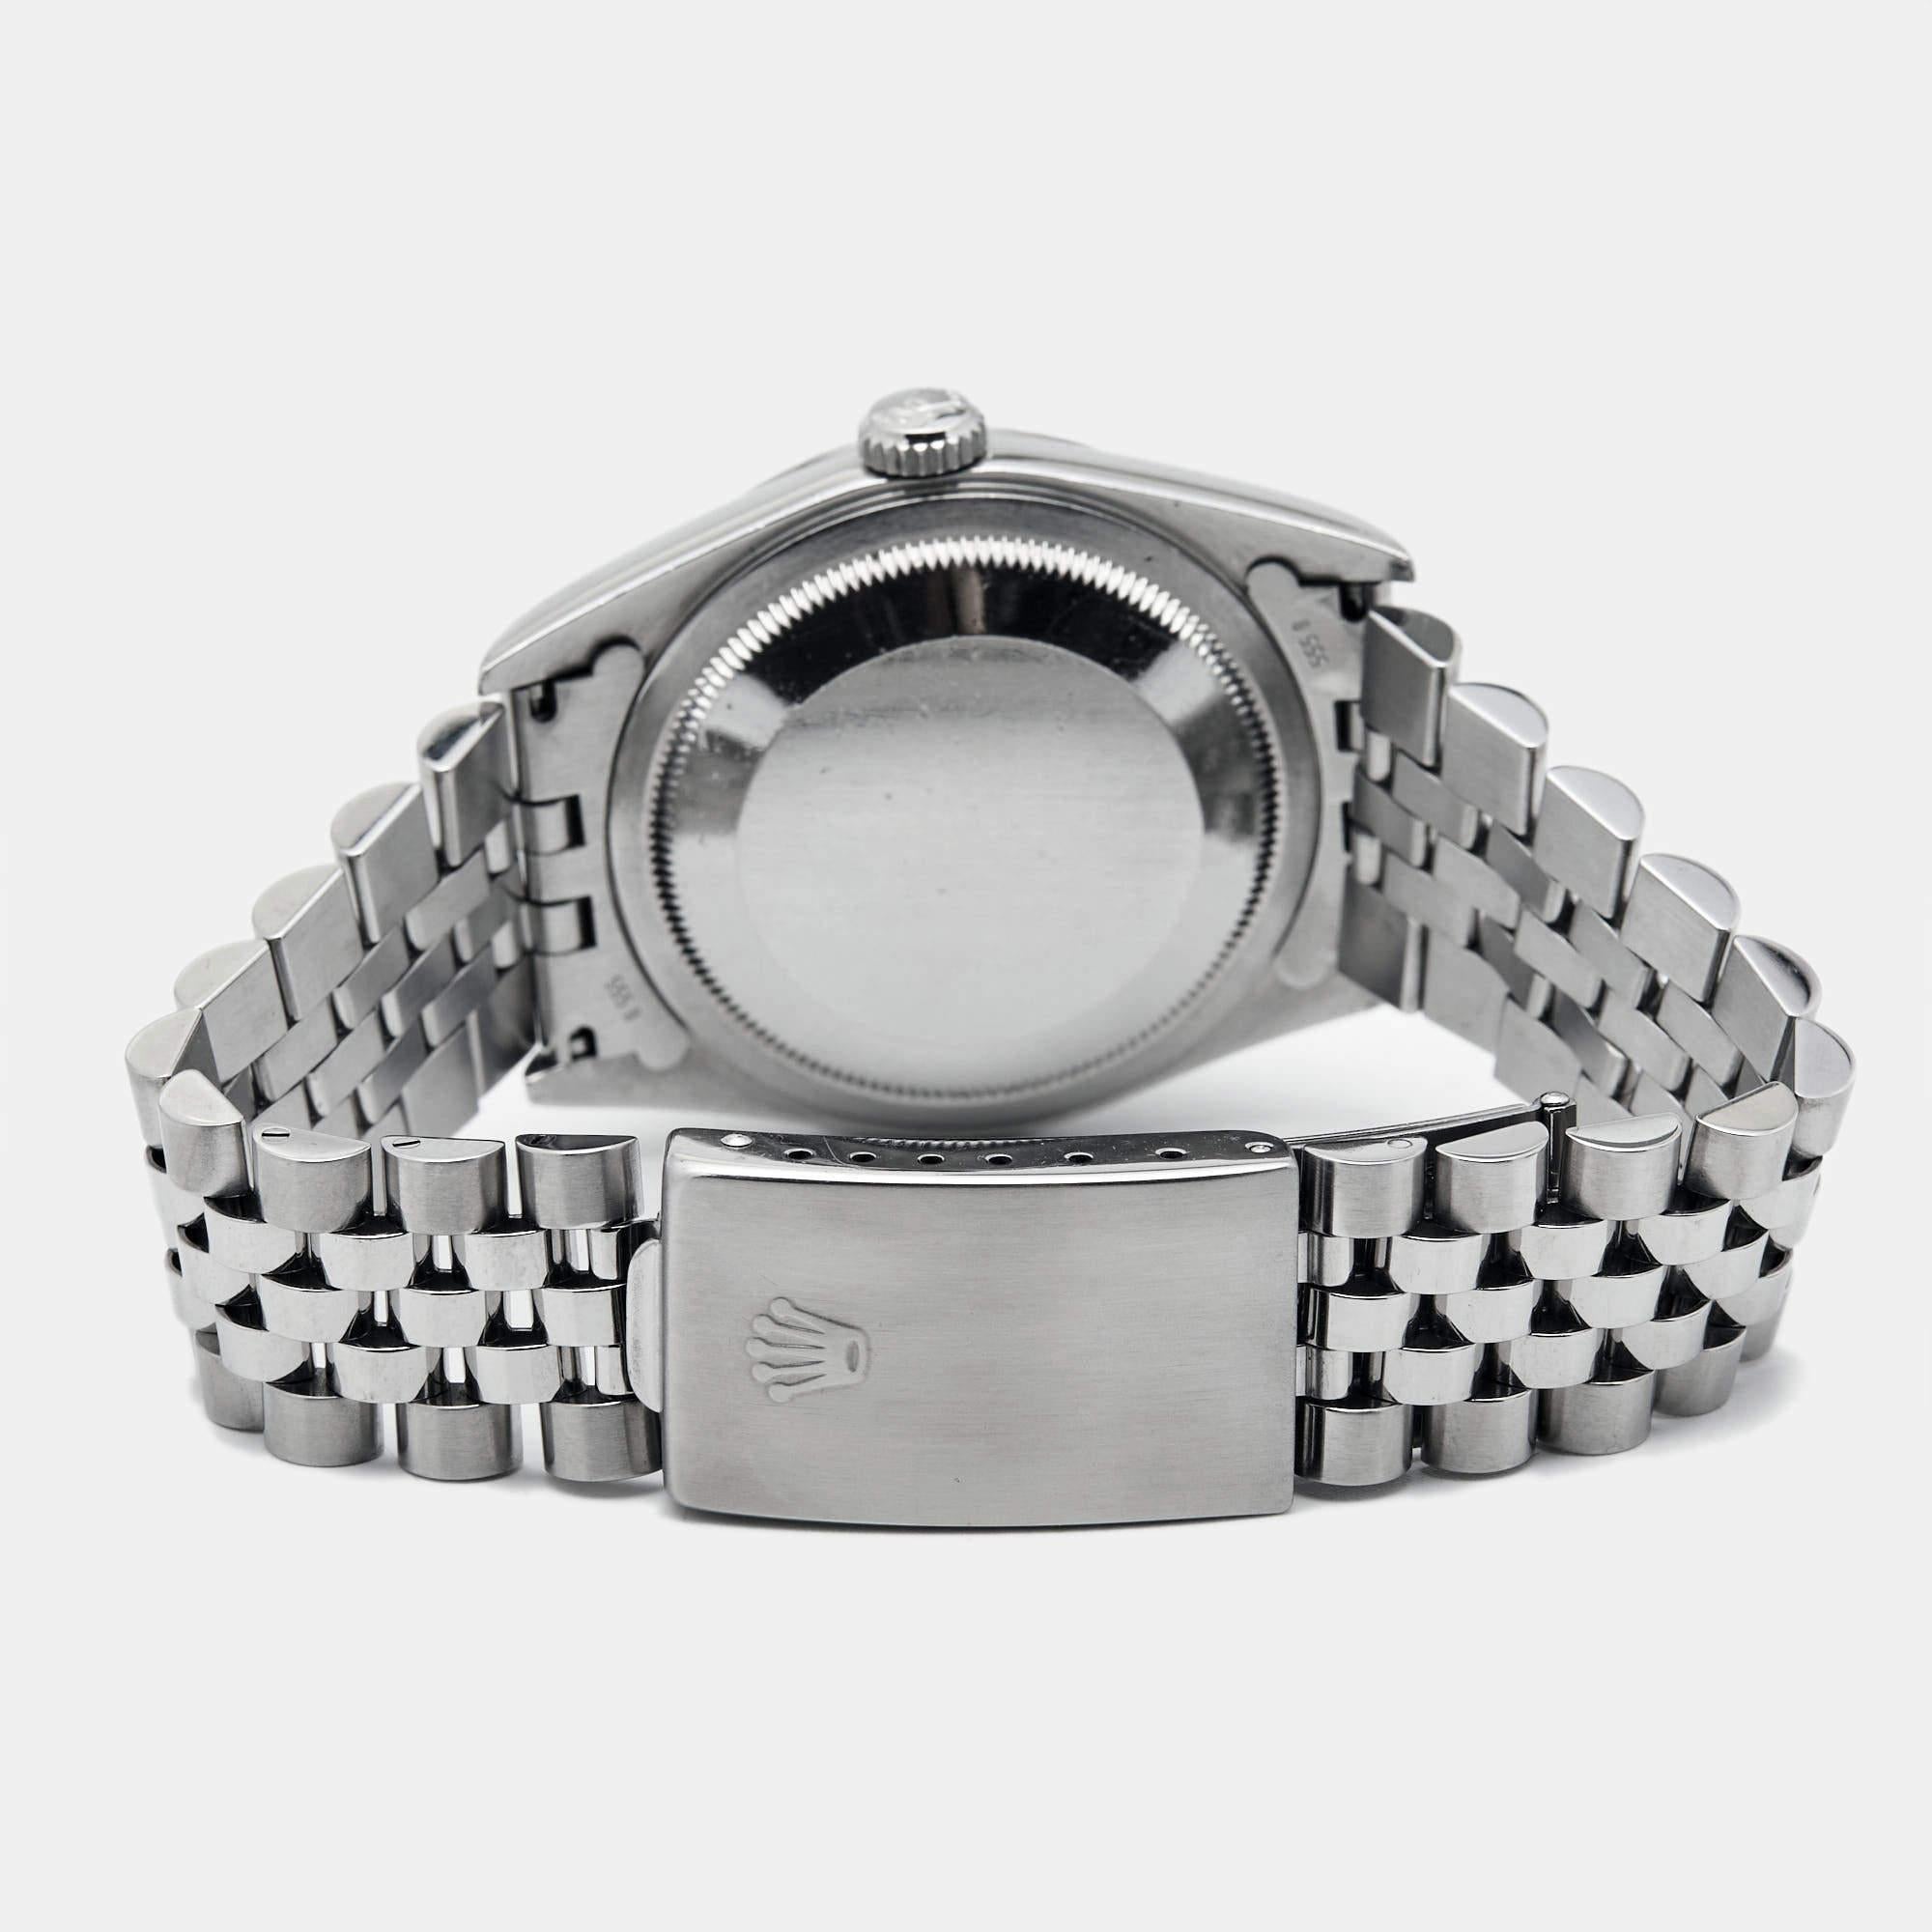 The Datejust is one of the most recognized and coveted watches from the house of Rolex. It has a distinct look and an irrefutable appeal. Crafted in stainless steel and 18k white gold, this authentic Rolex Datejust wristwatch has the signature